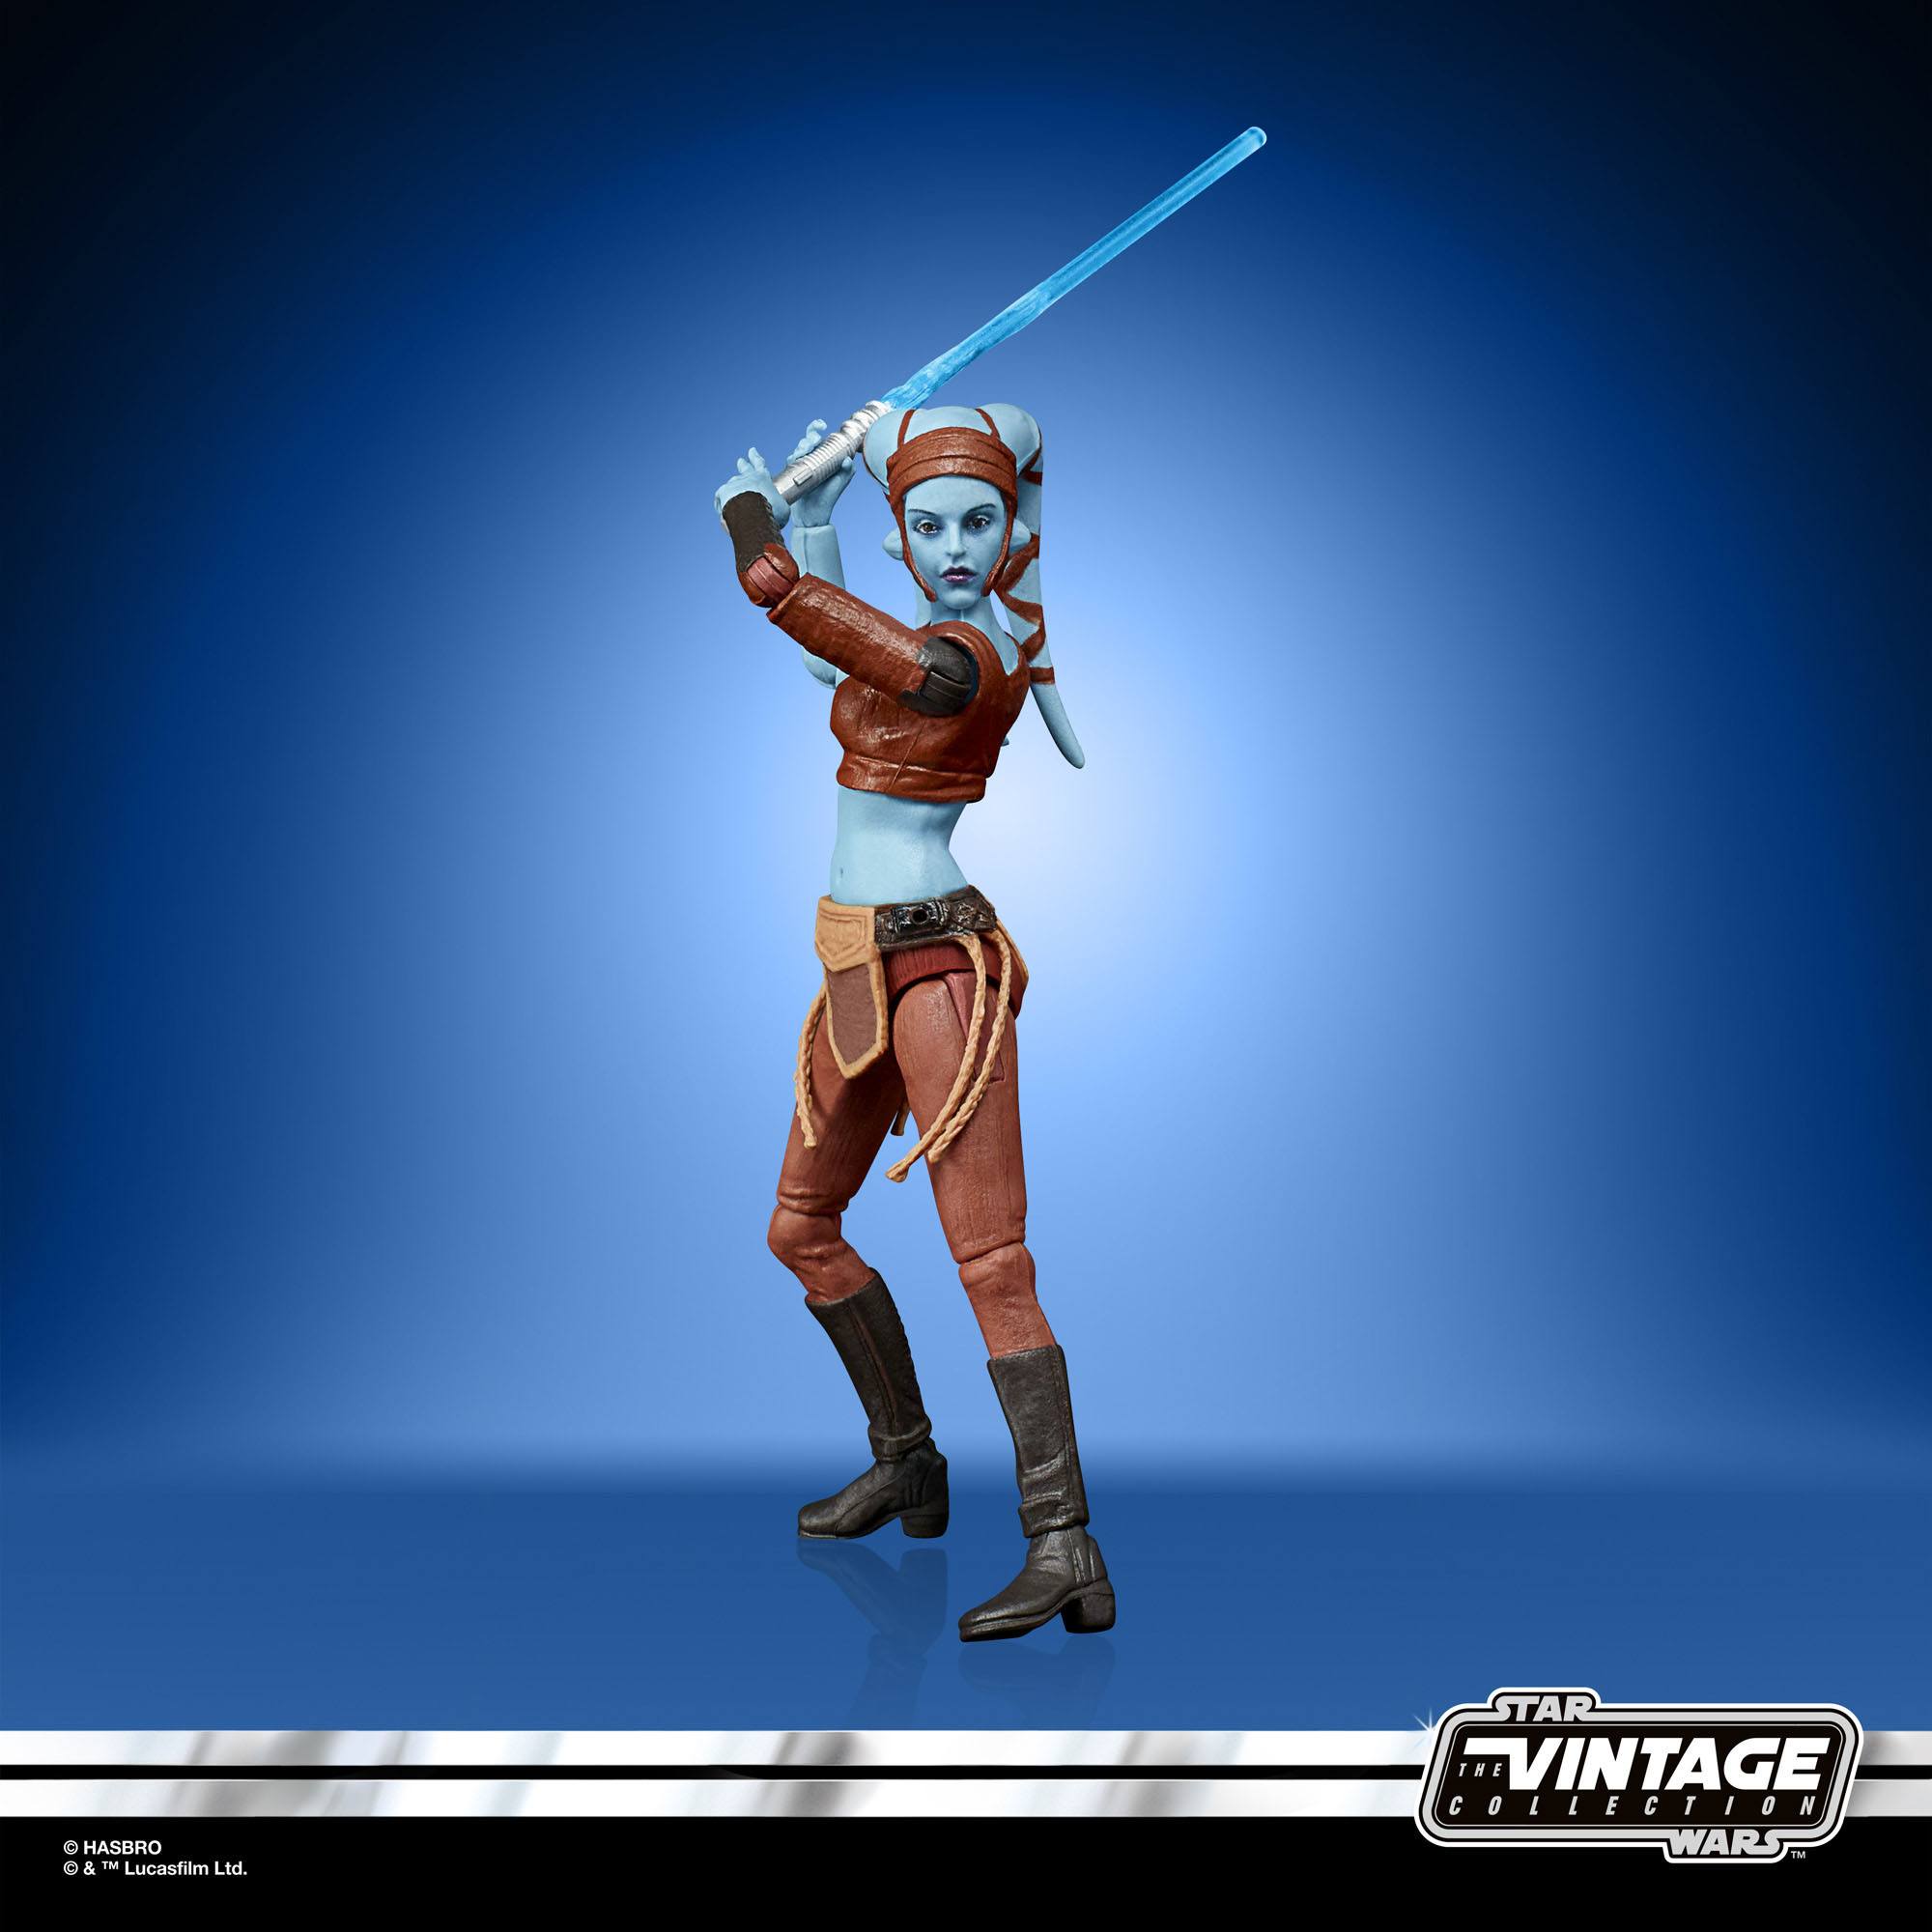 Star Wars The Clone Wars Vintage Collection Actionfigur 2022 Aayla Secura 10 cm F54165L00 5010993980963